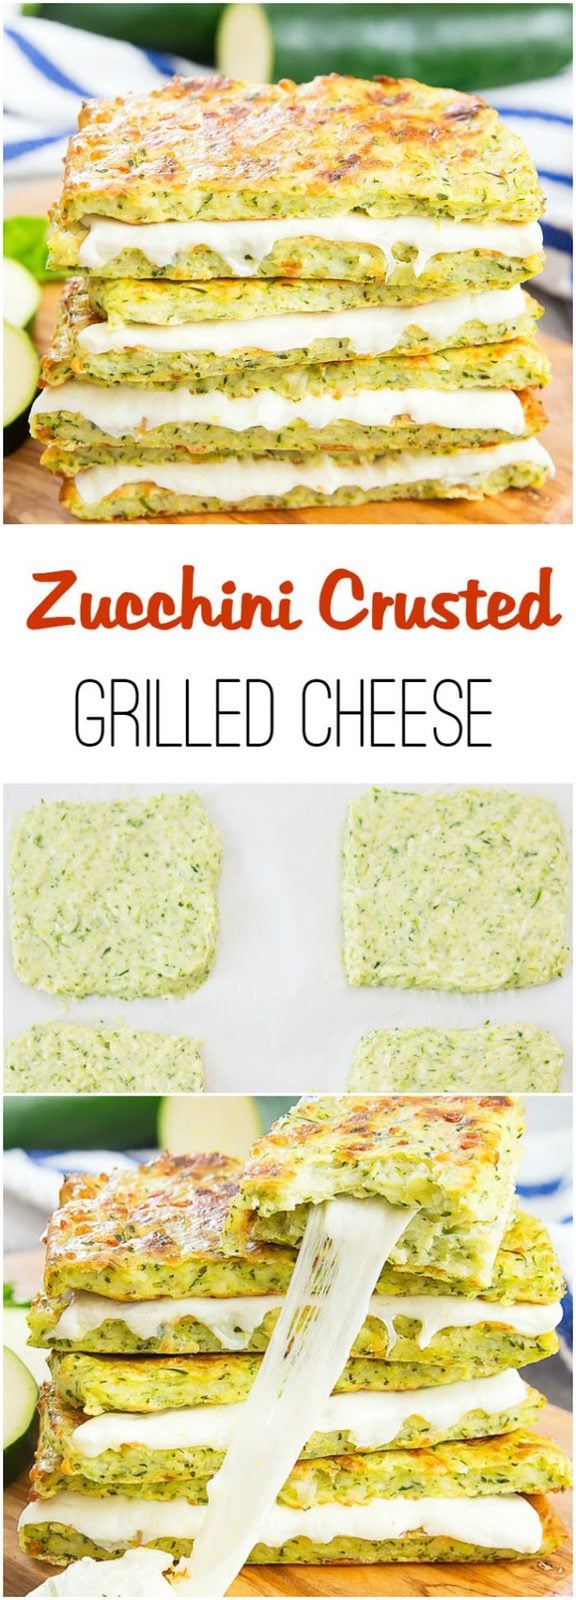 Zucchini Crusted Grilled Cheese Sandwiches